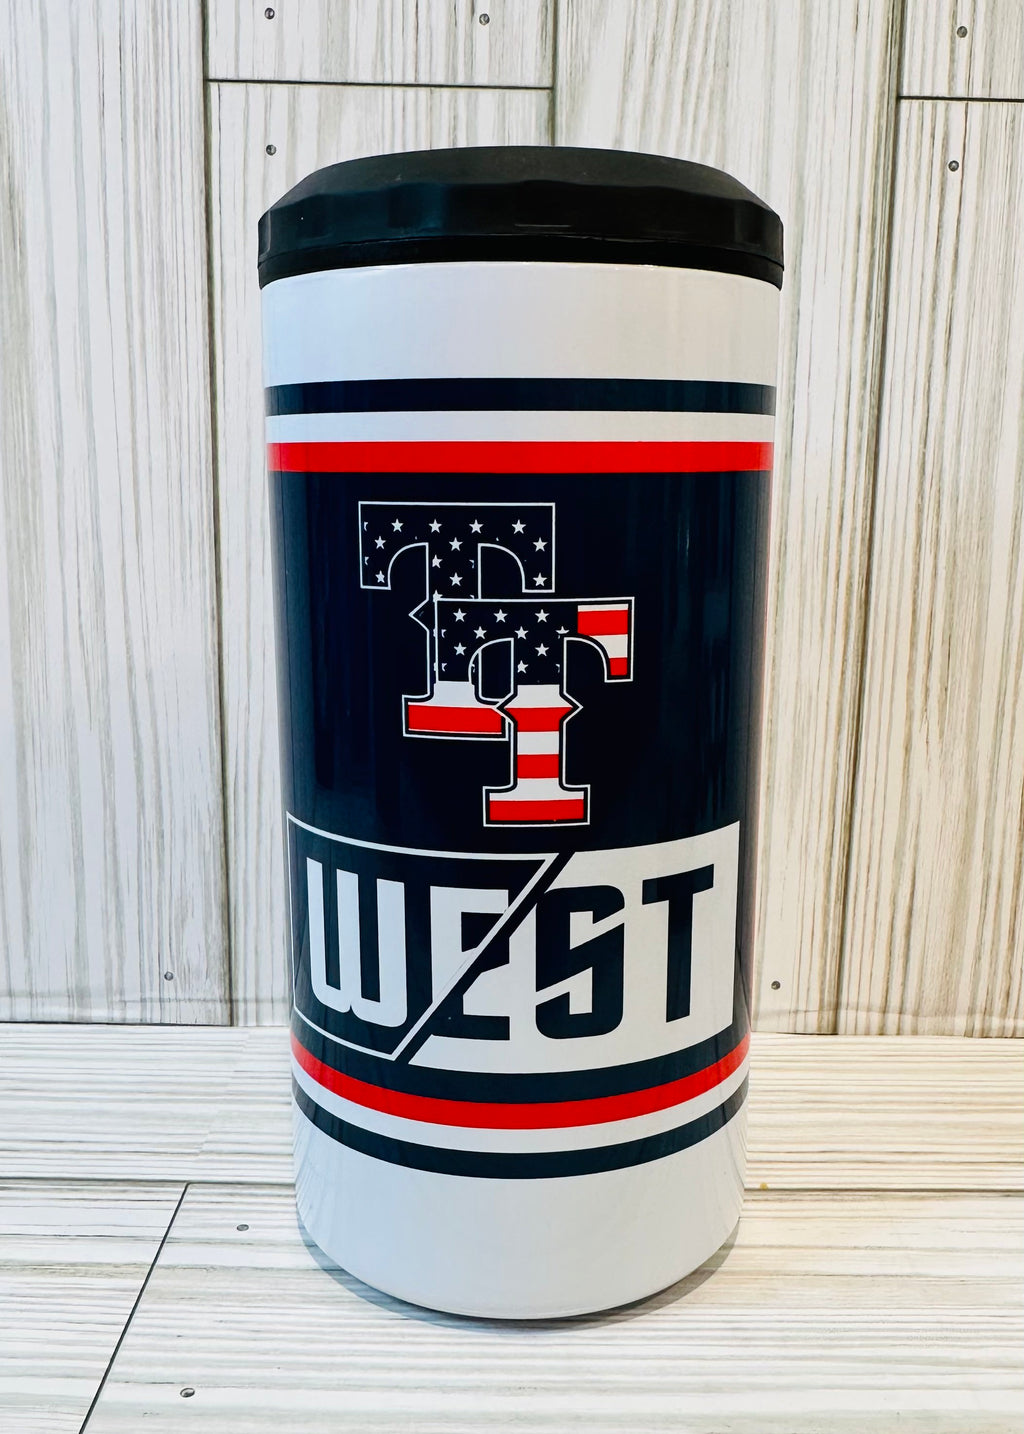 Top Tier West Can Cooler (Square Logo)